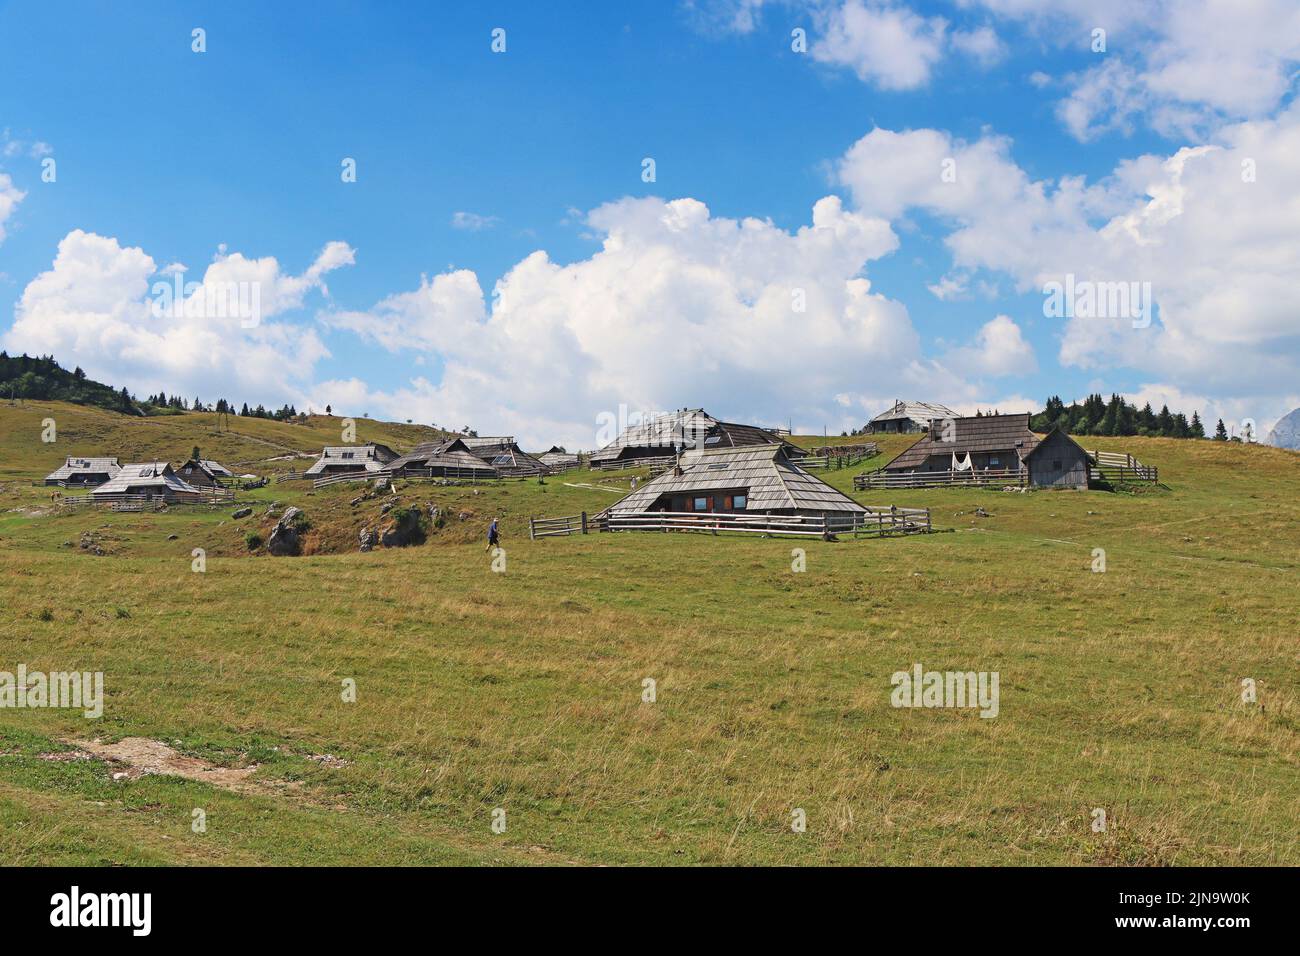 Herdsmens huts and cows on the Big Mountain Plateau in Slovenia in the Kamnik Savinja Alps Stock Photo